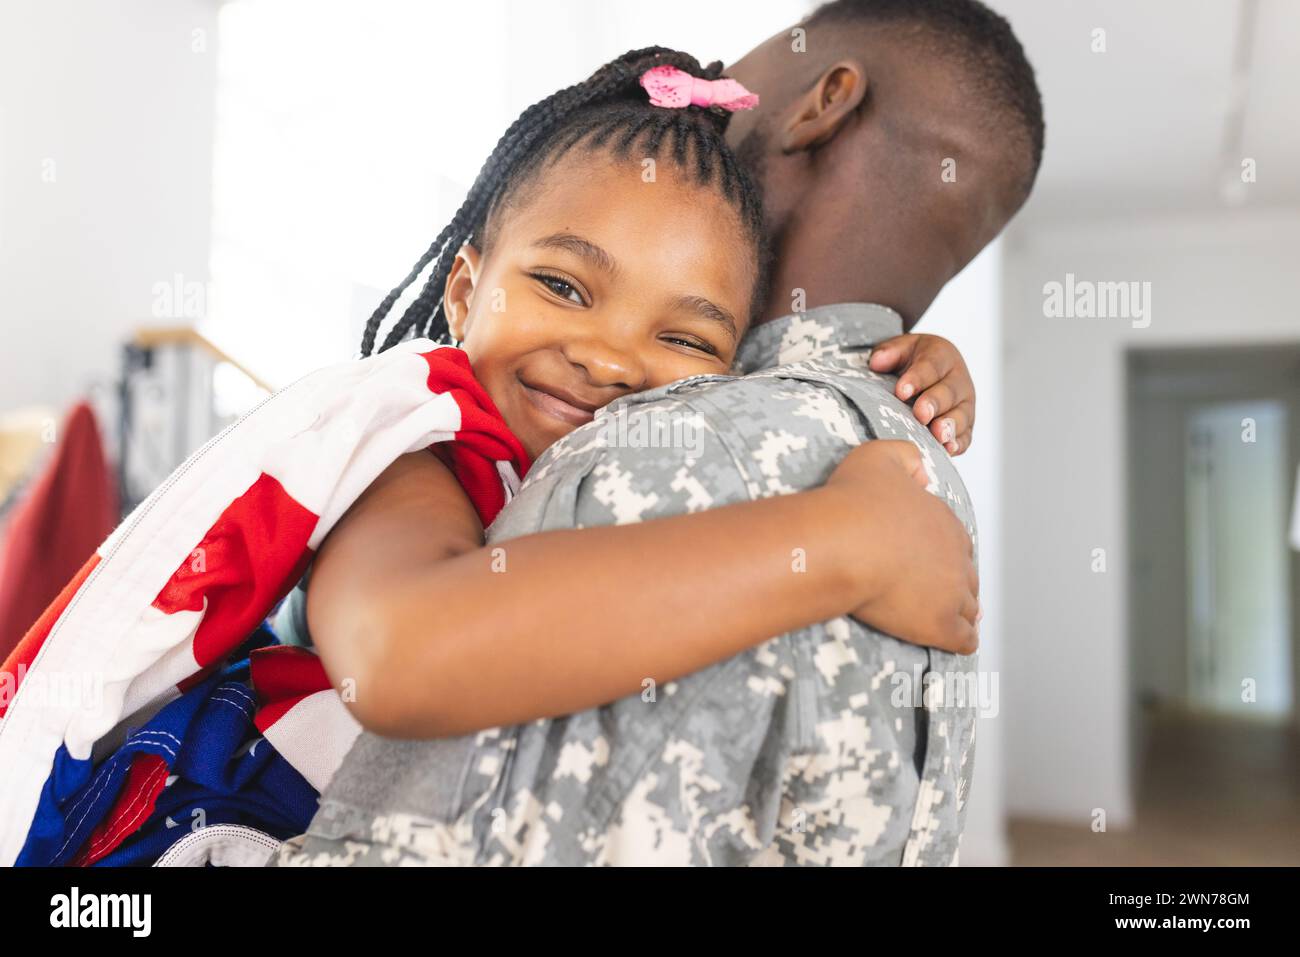 African American girl embraces a soldier, her smile radiates joy, with an American flag Stock Photo